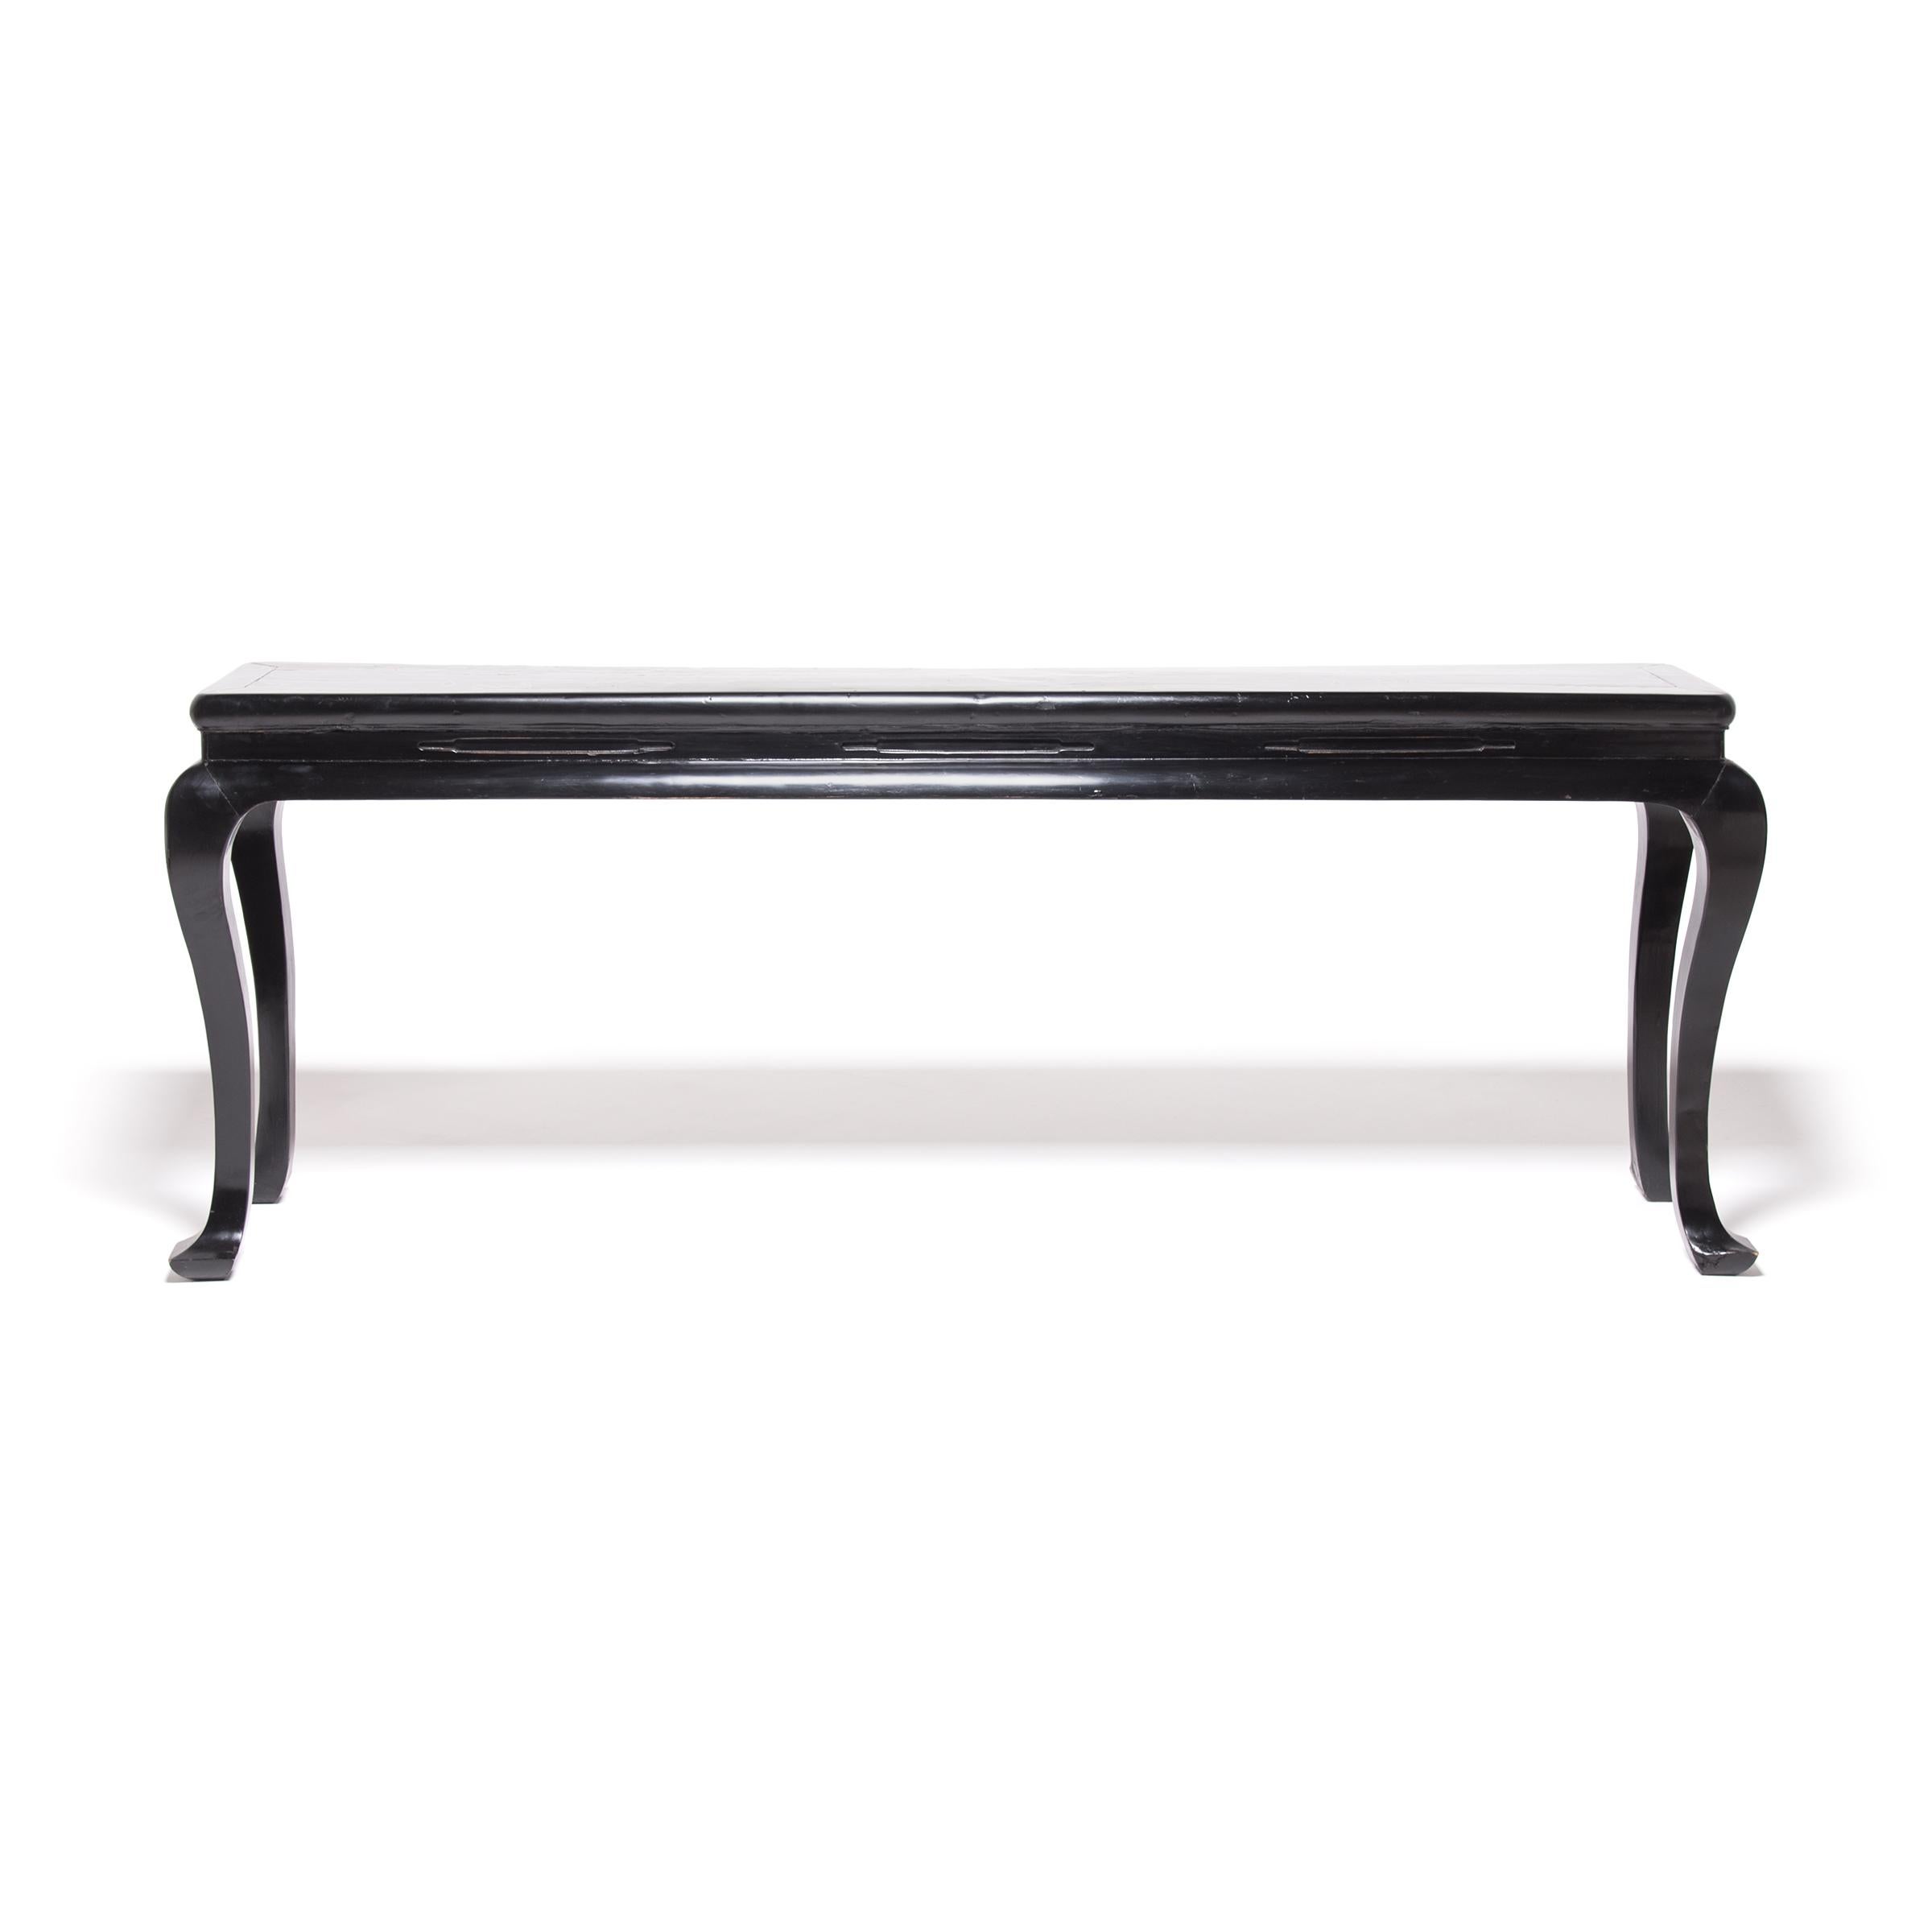 With deceptively simple design, this narrow console table would have been favored by a Chinese scholar for its well-executed curves, gracefully arched like the sweep of a calligraphy brushstroke. Conforming to the minimal aesthetic of Ming-dynasty